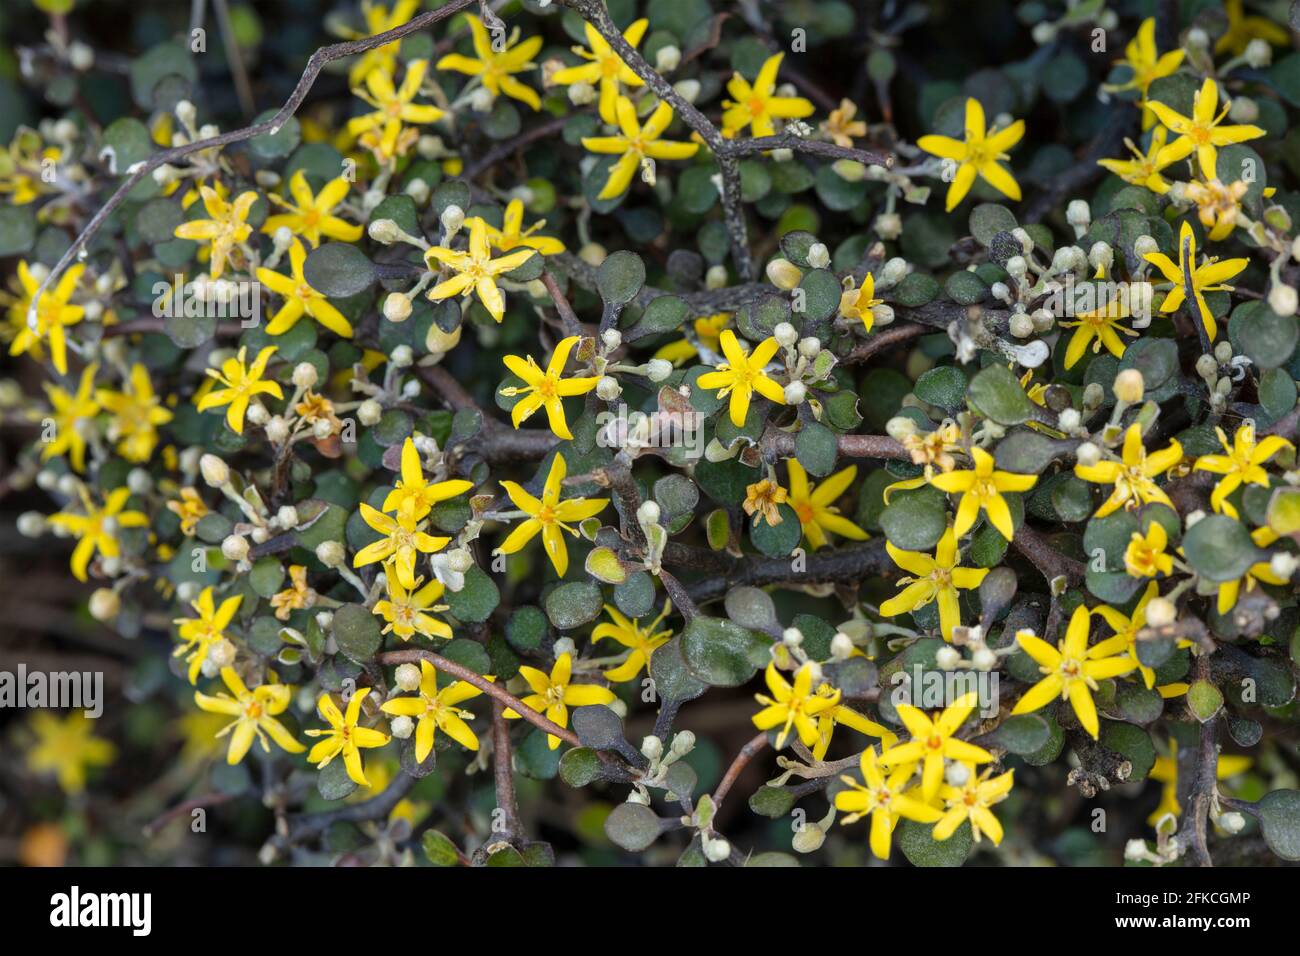 Corokia Cotoneaster, wire-netting bush, with bright yellow flowers in spring Stock Photo